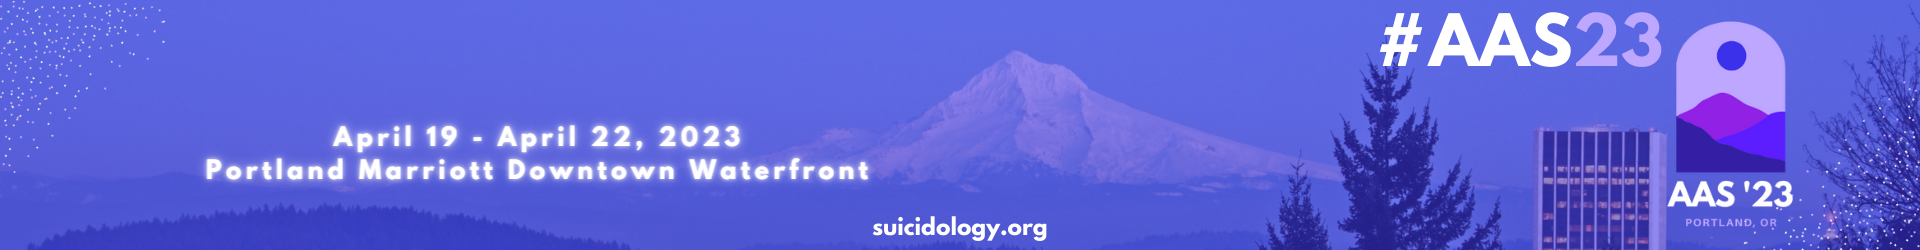 AAS23: American Association of Suicidology Annual Conference Event Banner